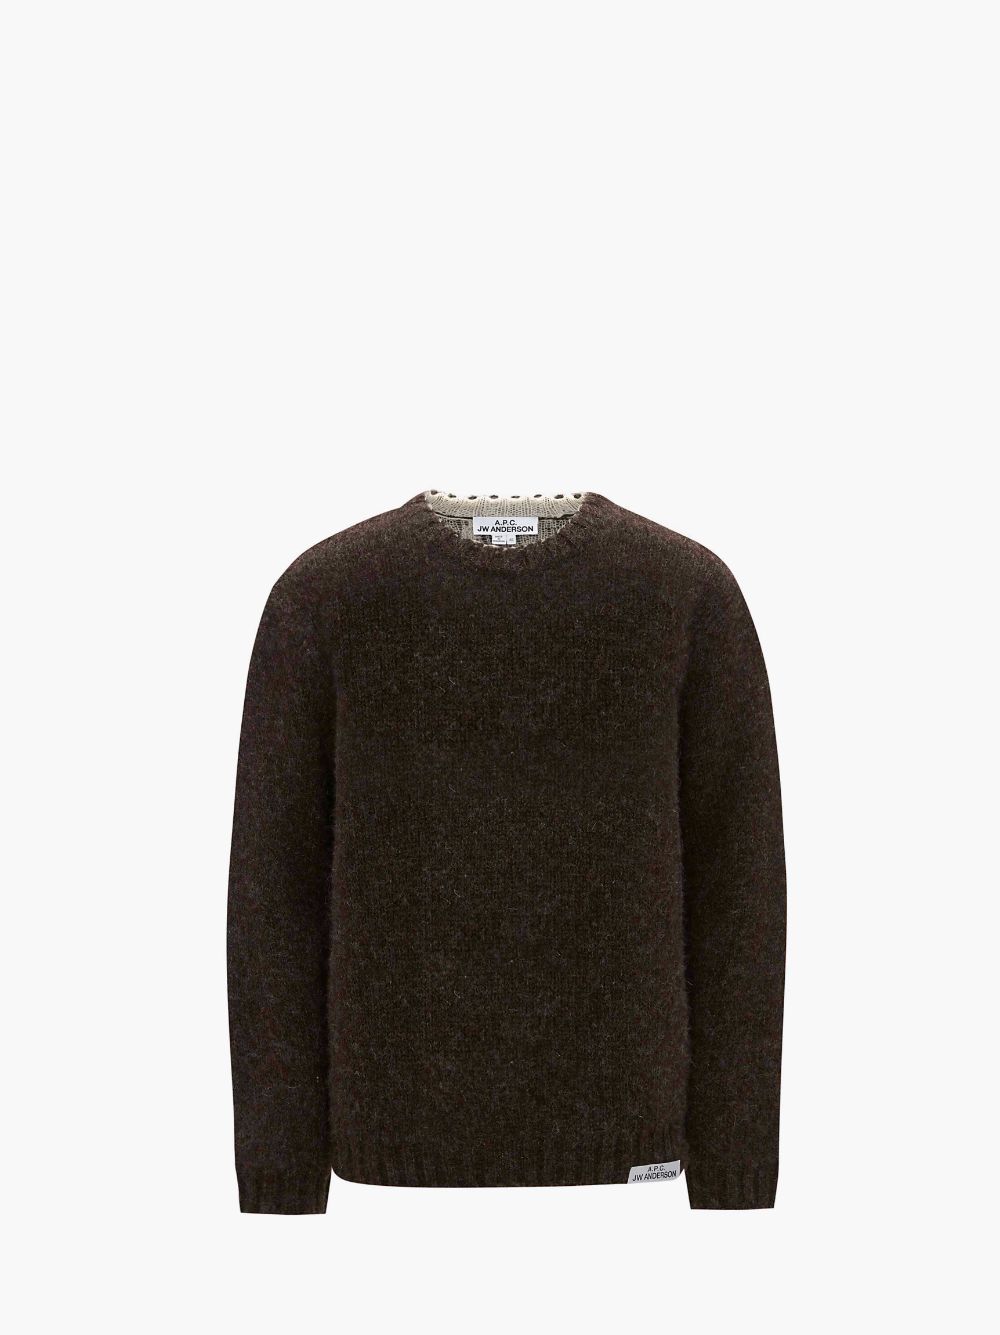 A.P.C. X JW ANDERSON - PULL ANGE クルーネック セーター in ブラウン 